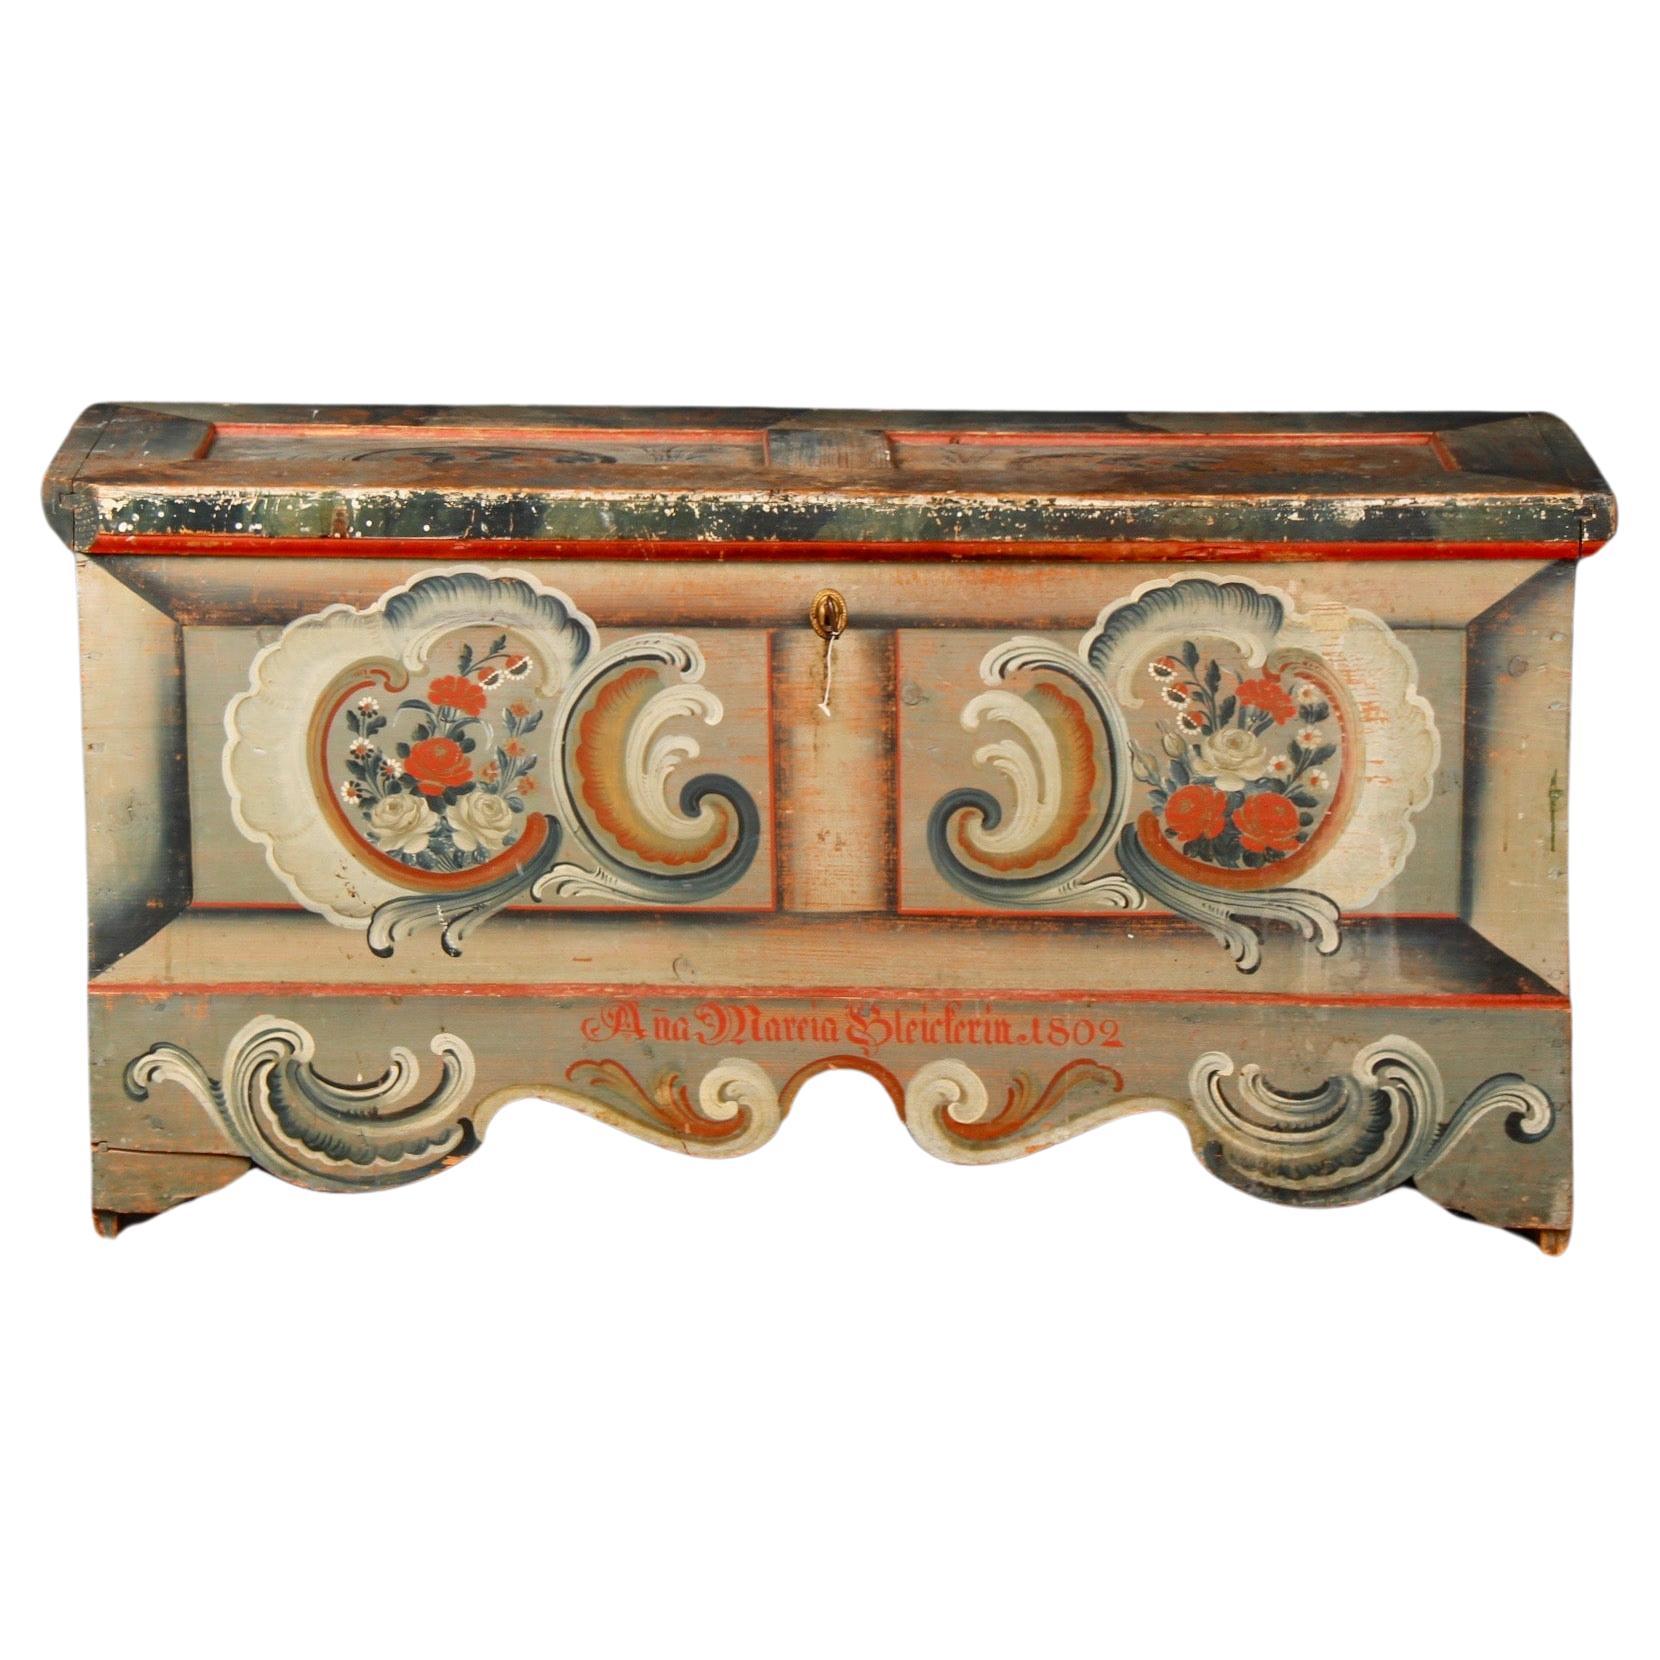 Swiss alp painted trunk dated 1808 For Sale